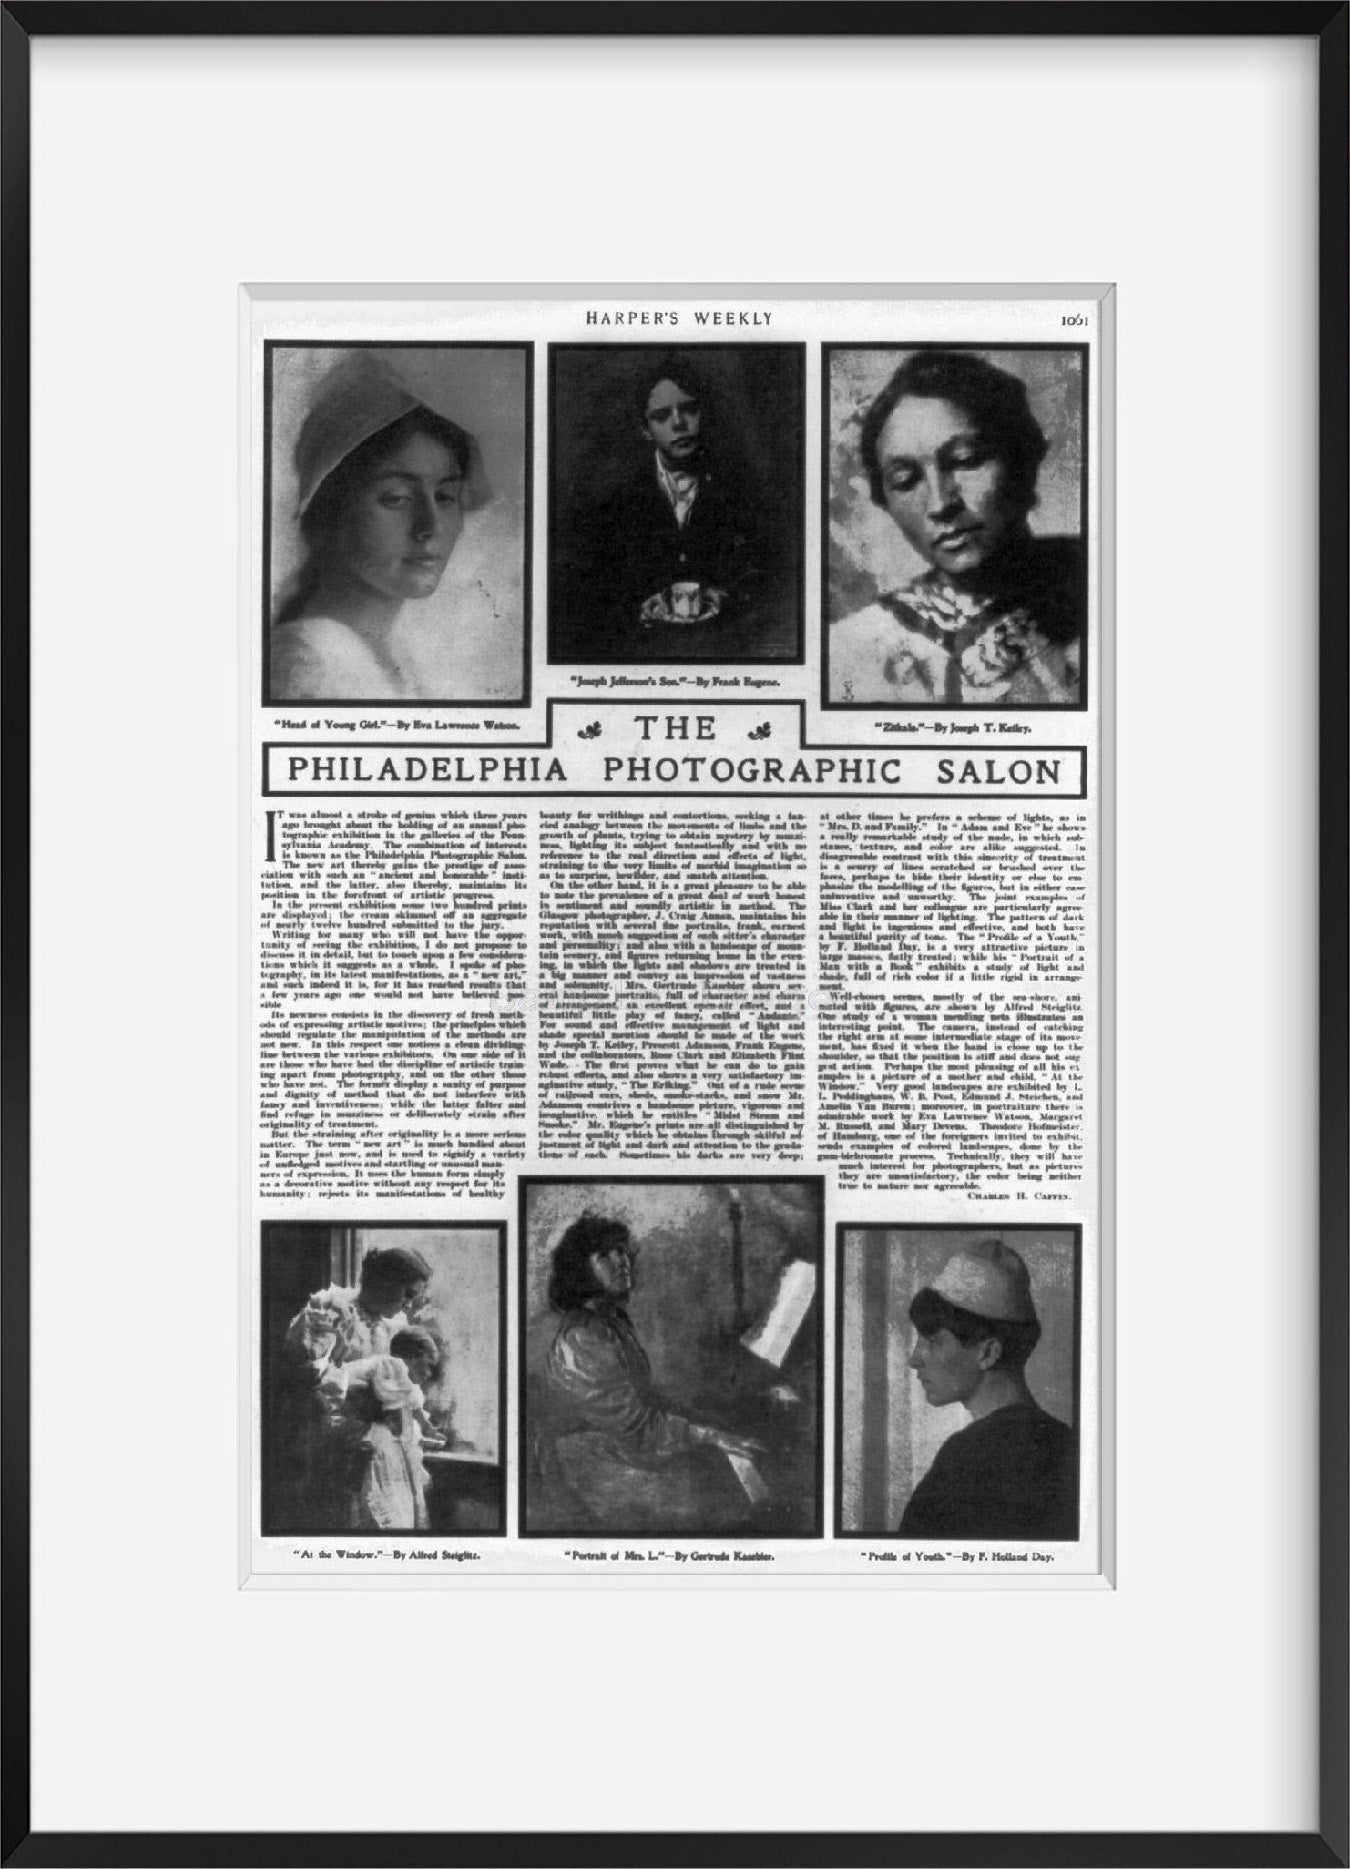 1900 Photo The Philadelphia photographic salon Article by Charles H. Caffin publ